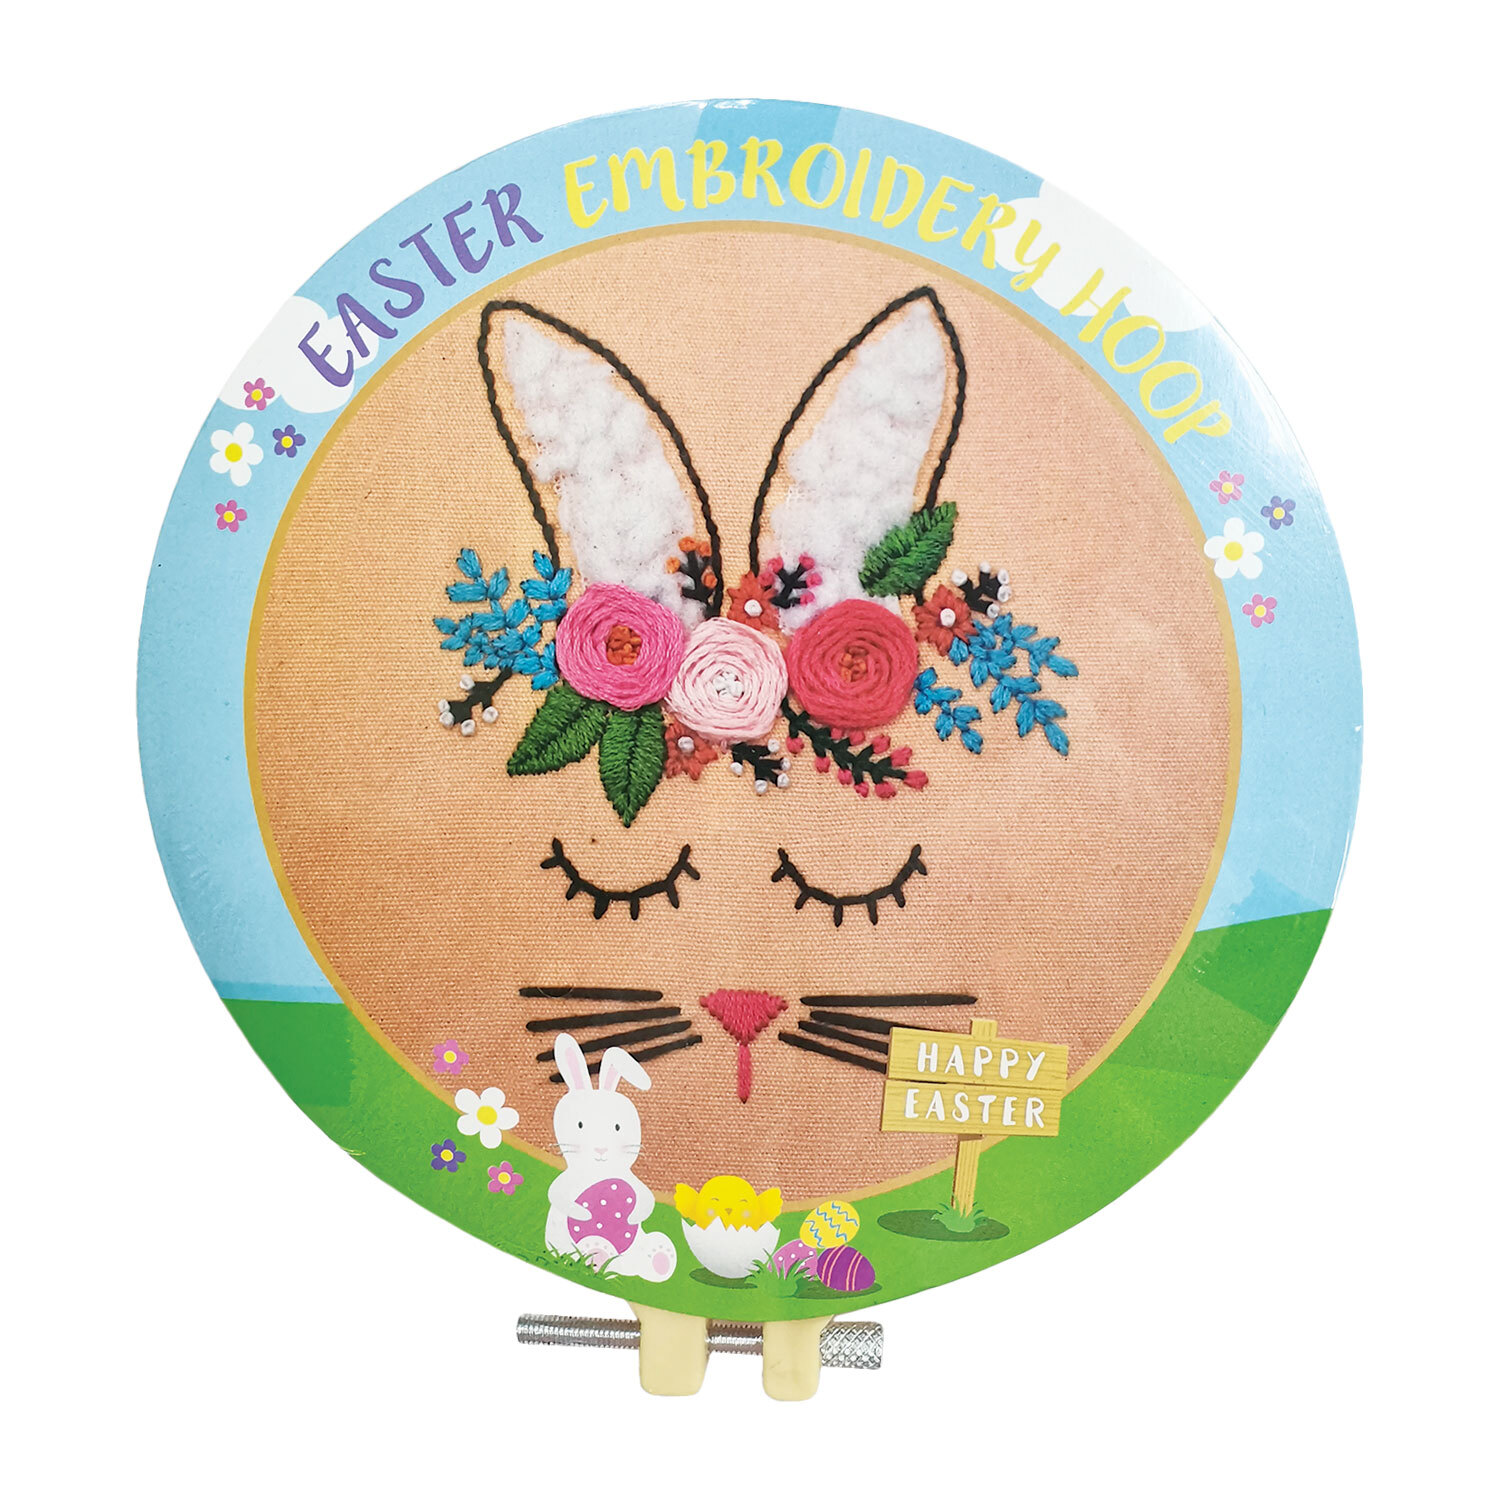 Make Your Own Easter Embroidery Hoop Image